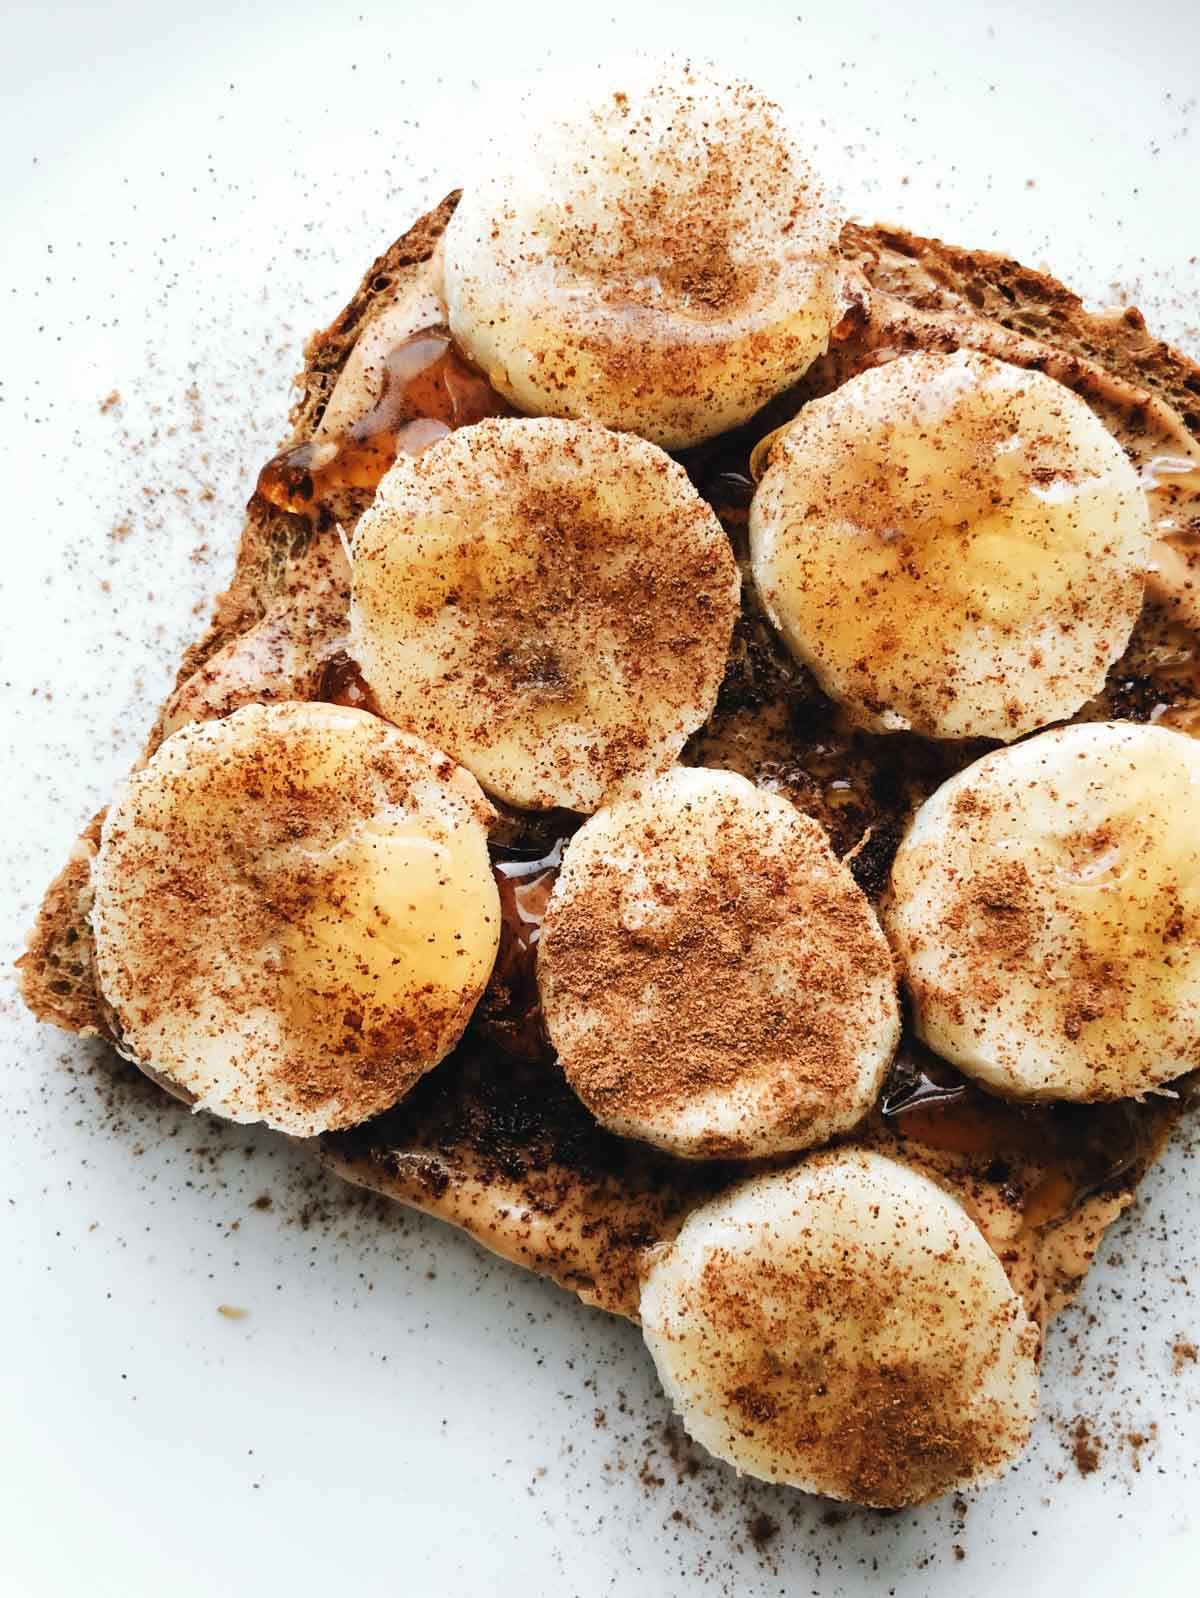 Peanut butter toast with bananas.